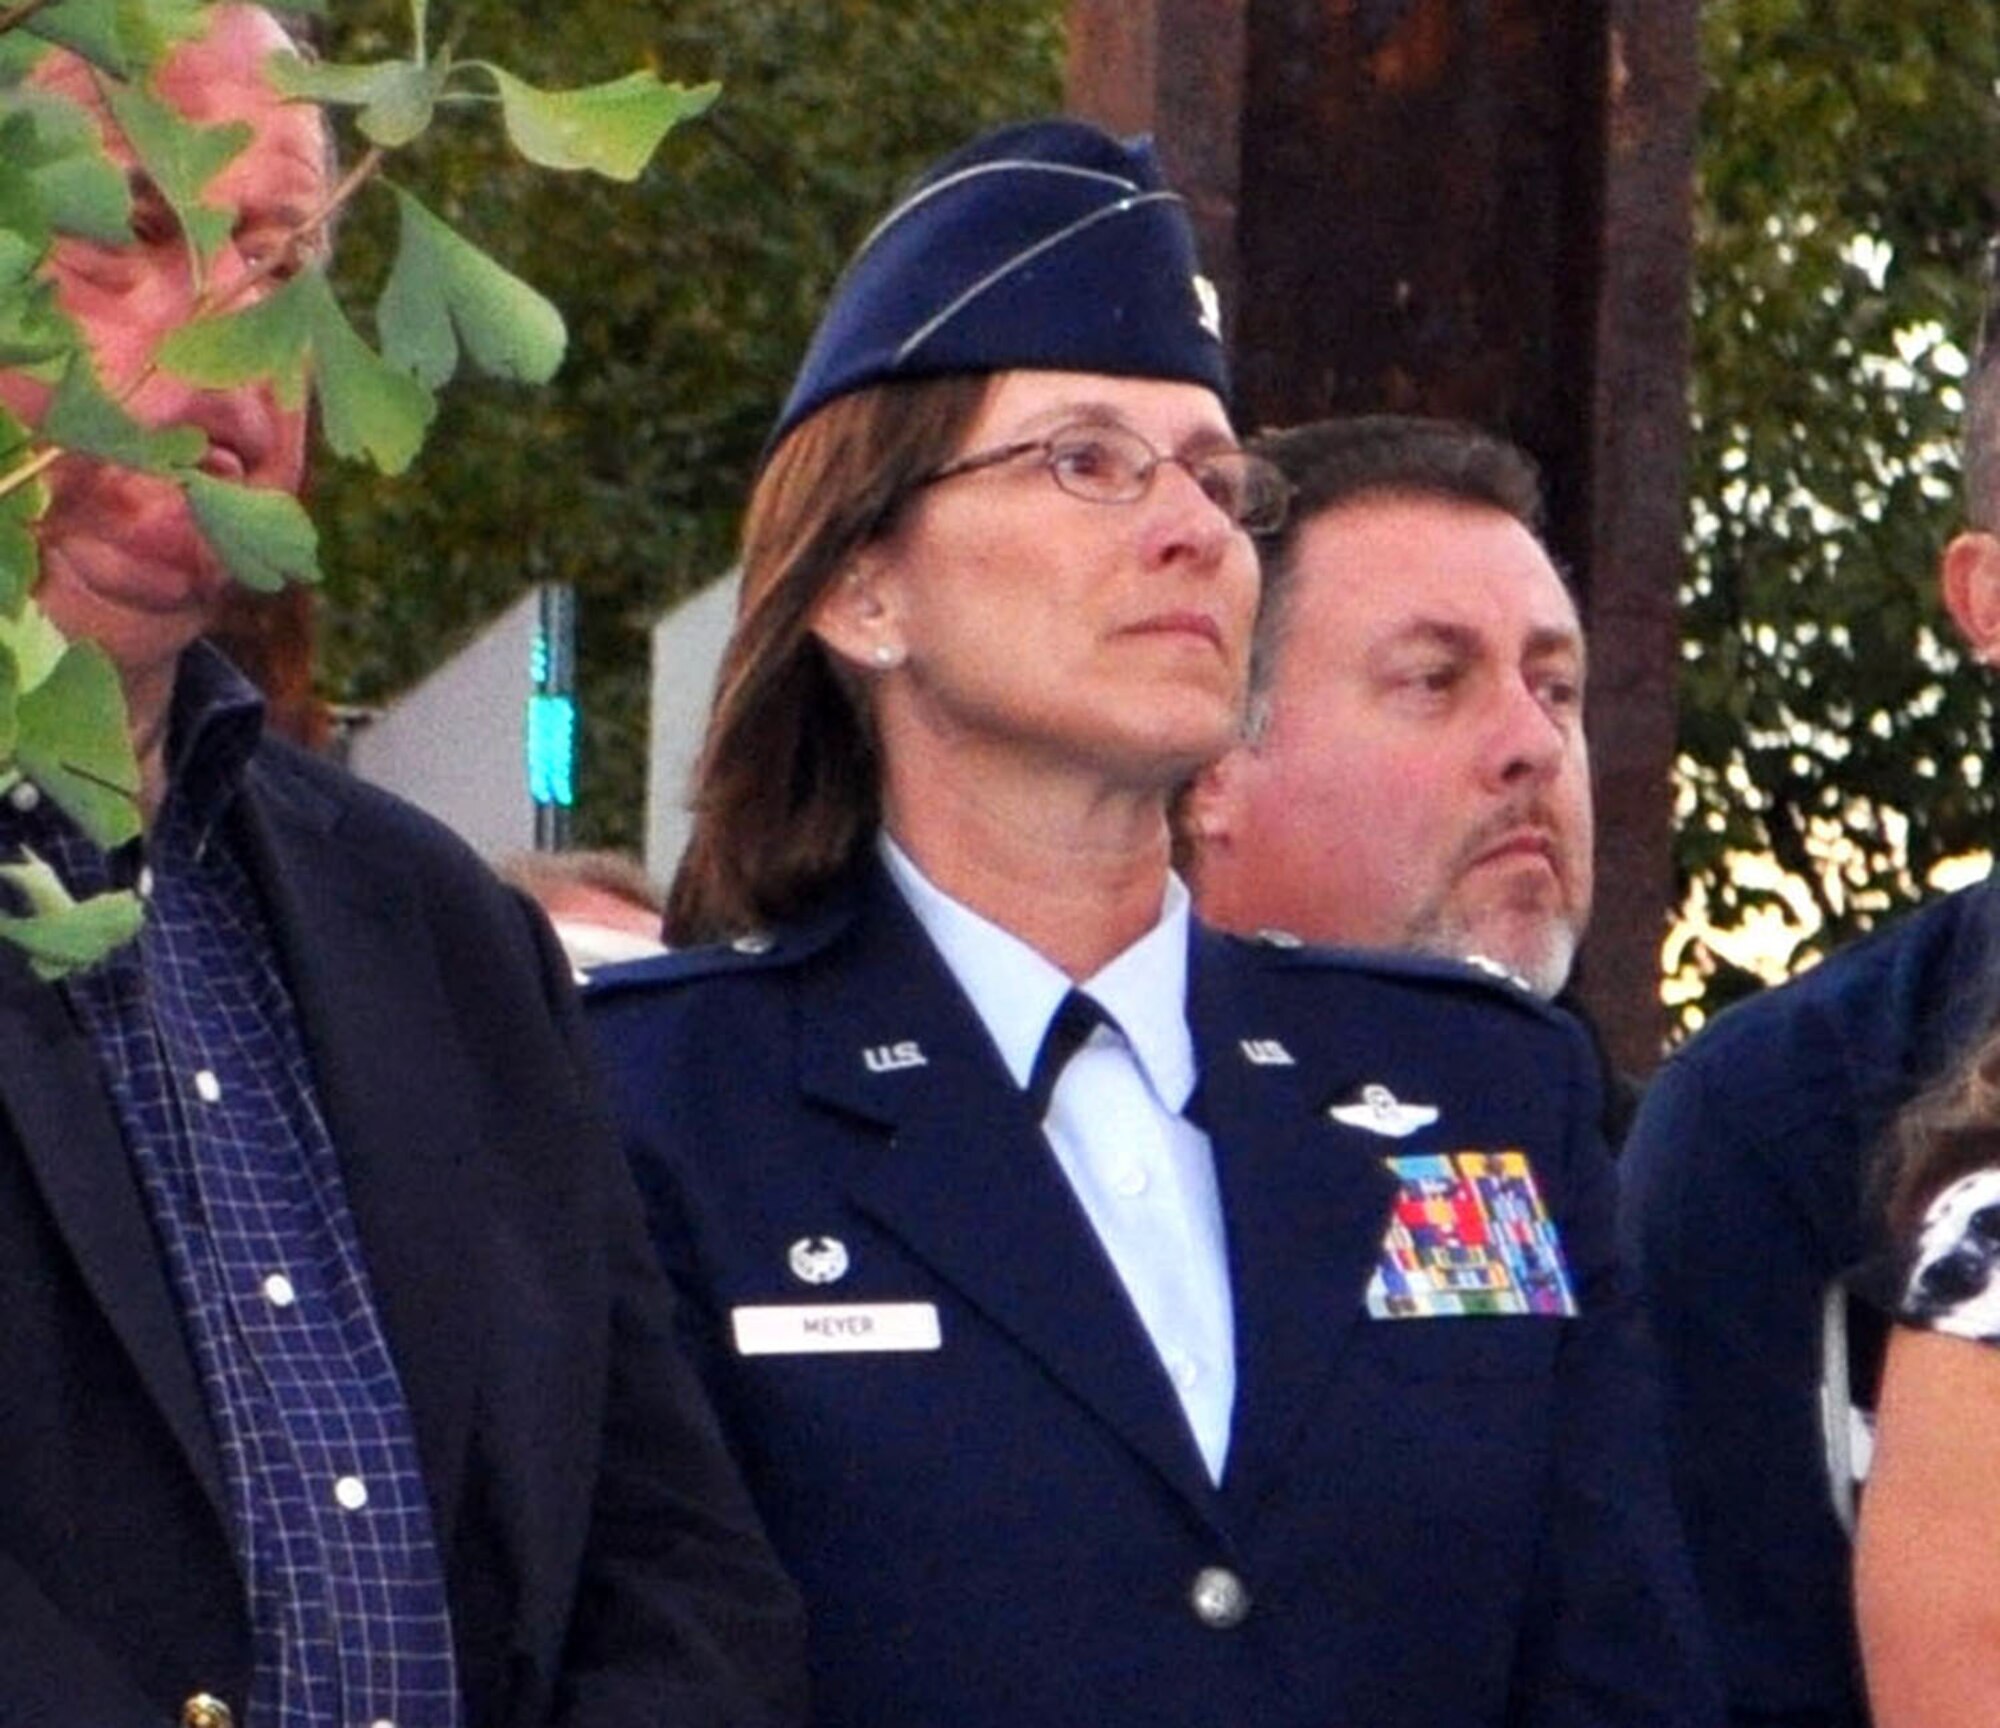 TRAVIS AIR FORCE BASE, Calif. -- Col. Ruth Meyer and her Honorary Commander, Napa Council member Bill Dodd, to her right, listen to a speaker at the Napa 9-11 Memorial Garden dedication, on the twelfth anniversary of the terrorist attack on America. Four of the steel beams from the World Trade Center stand in stark witness behind them, as part of the sculptural elements created by Napa artist, Gordon Huether. Meyer most recently was the reservist Commander of the 349th Operations Support Flight at Travis AFB, and has been selected to be the individual mobilization augmentee to the two star commander of The Air Force Safety Center, Kirtland AFB, N.M. (U.S. Air Force photo/Ellen Hatfield)